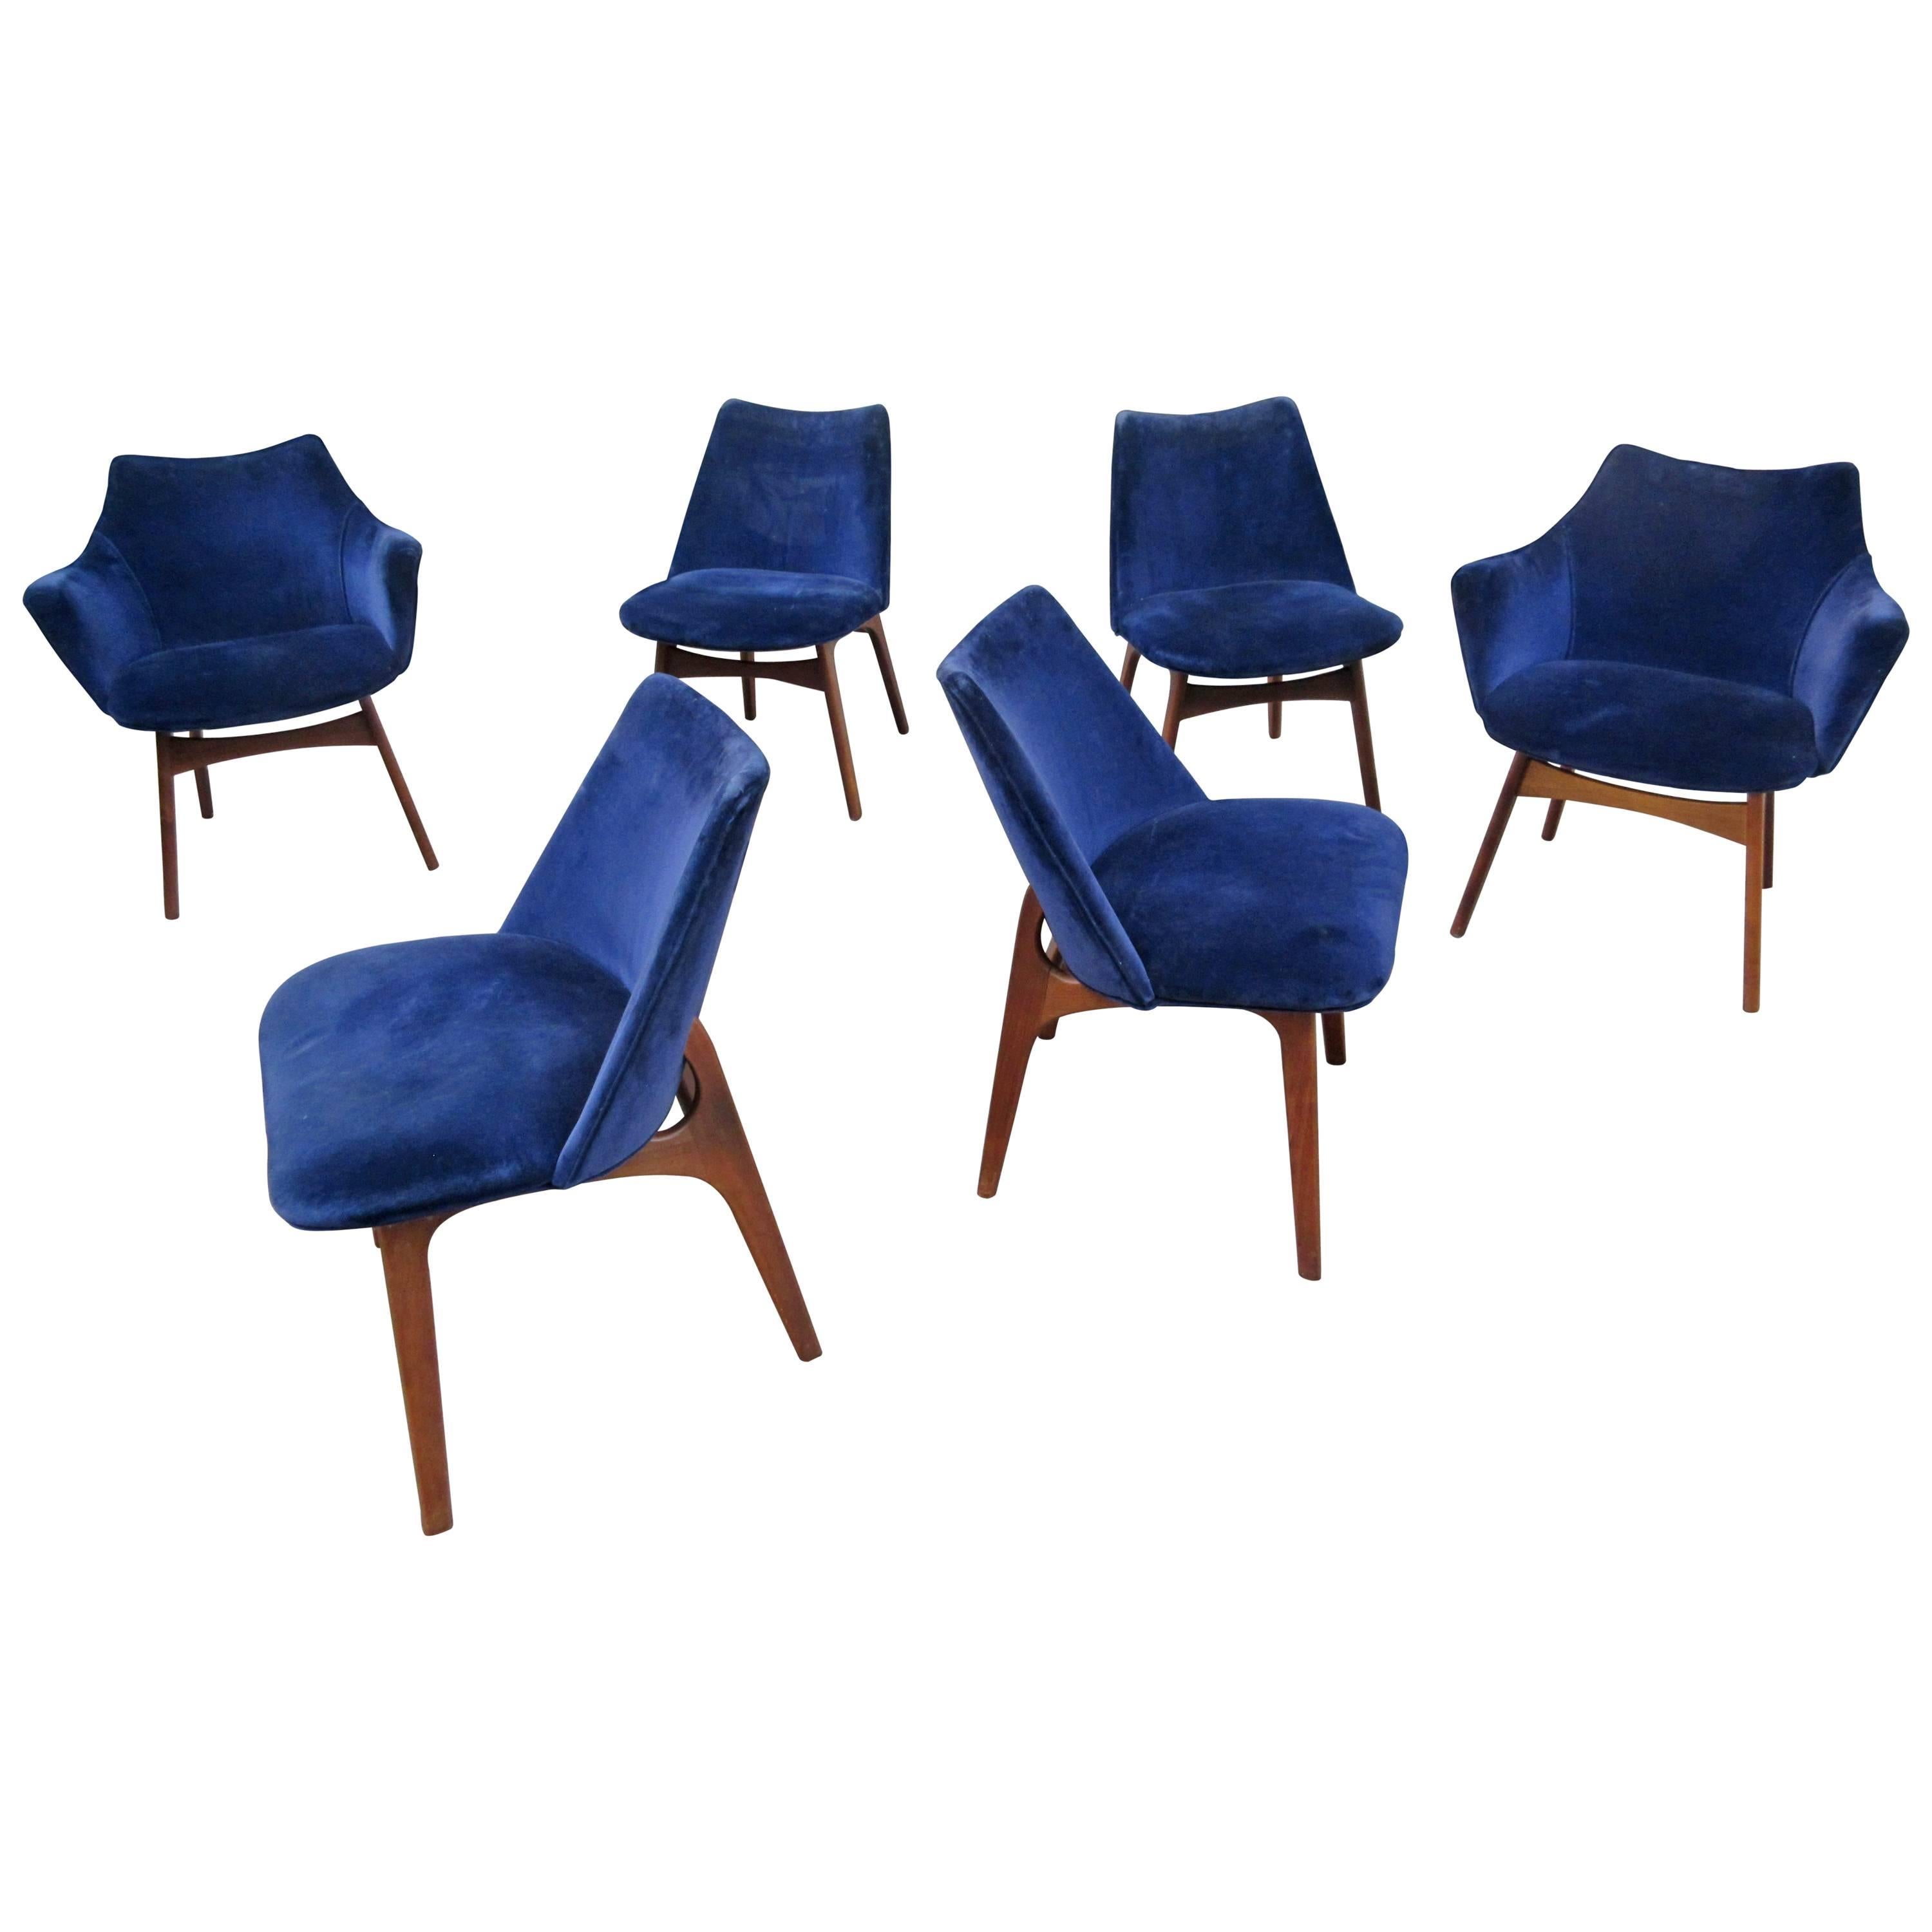 Set of Six Adrian Pearsall Dining Chairs for Craft Associates